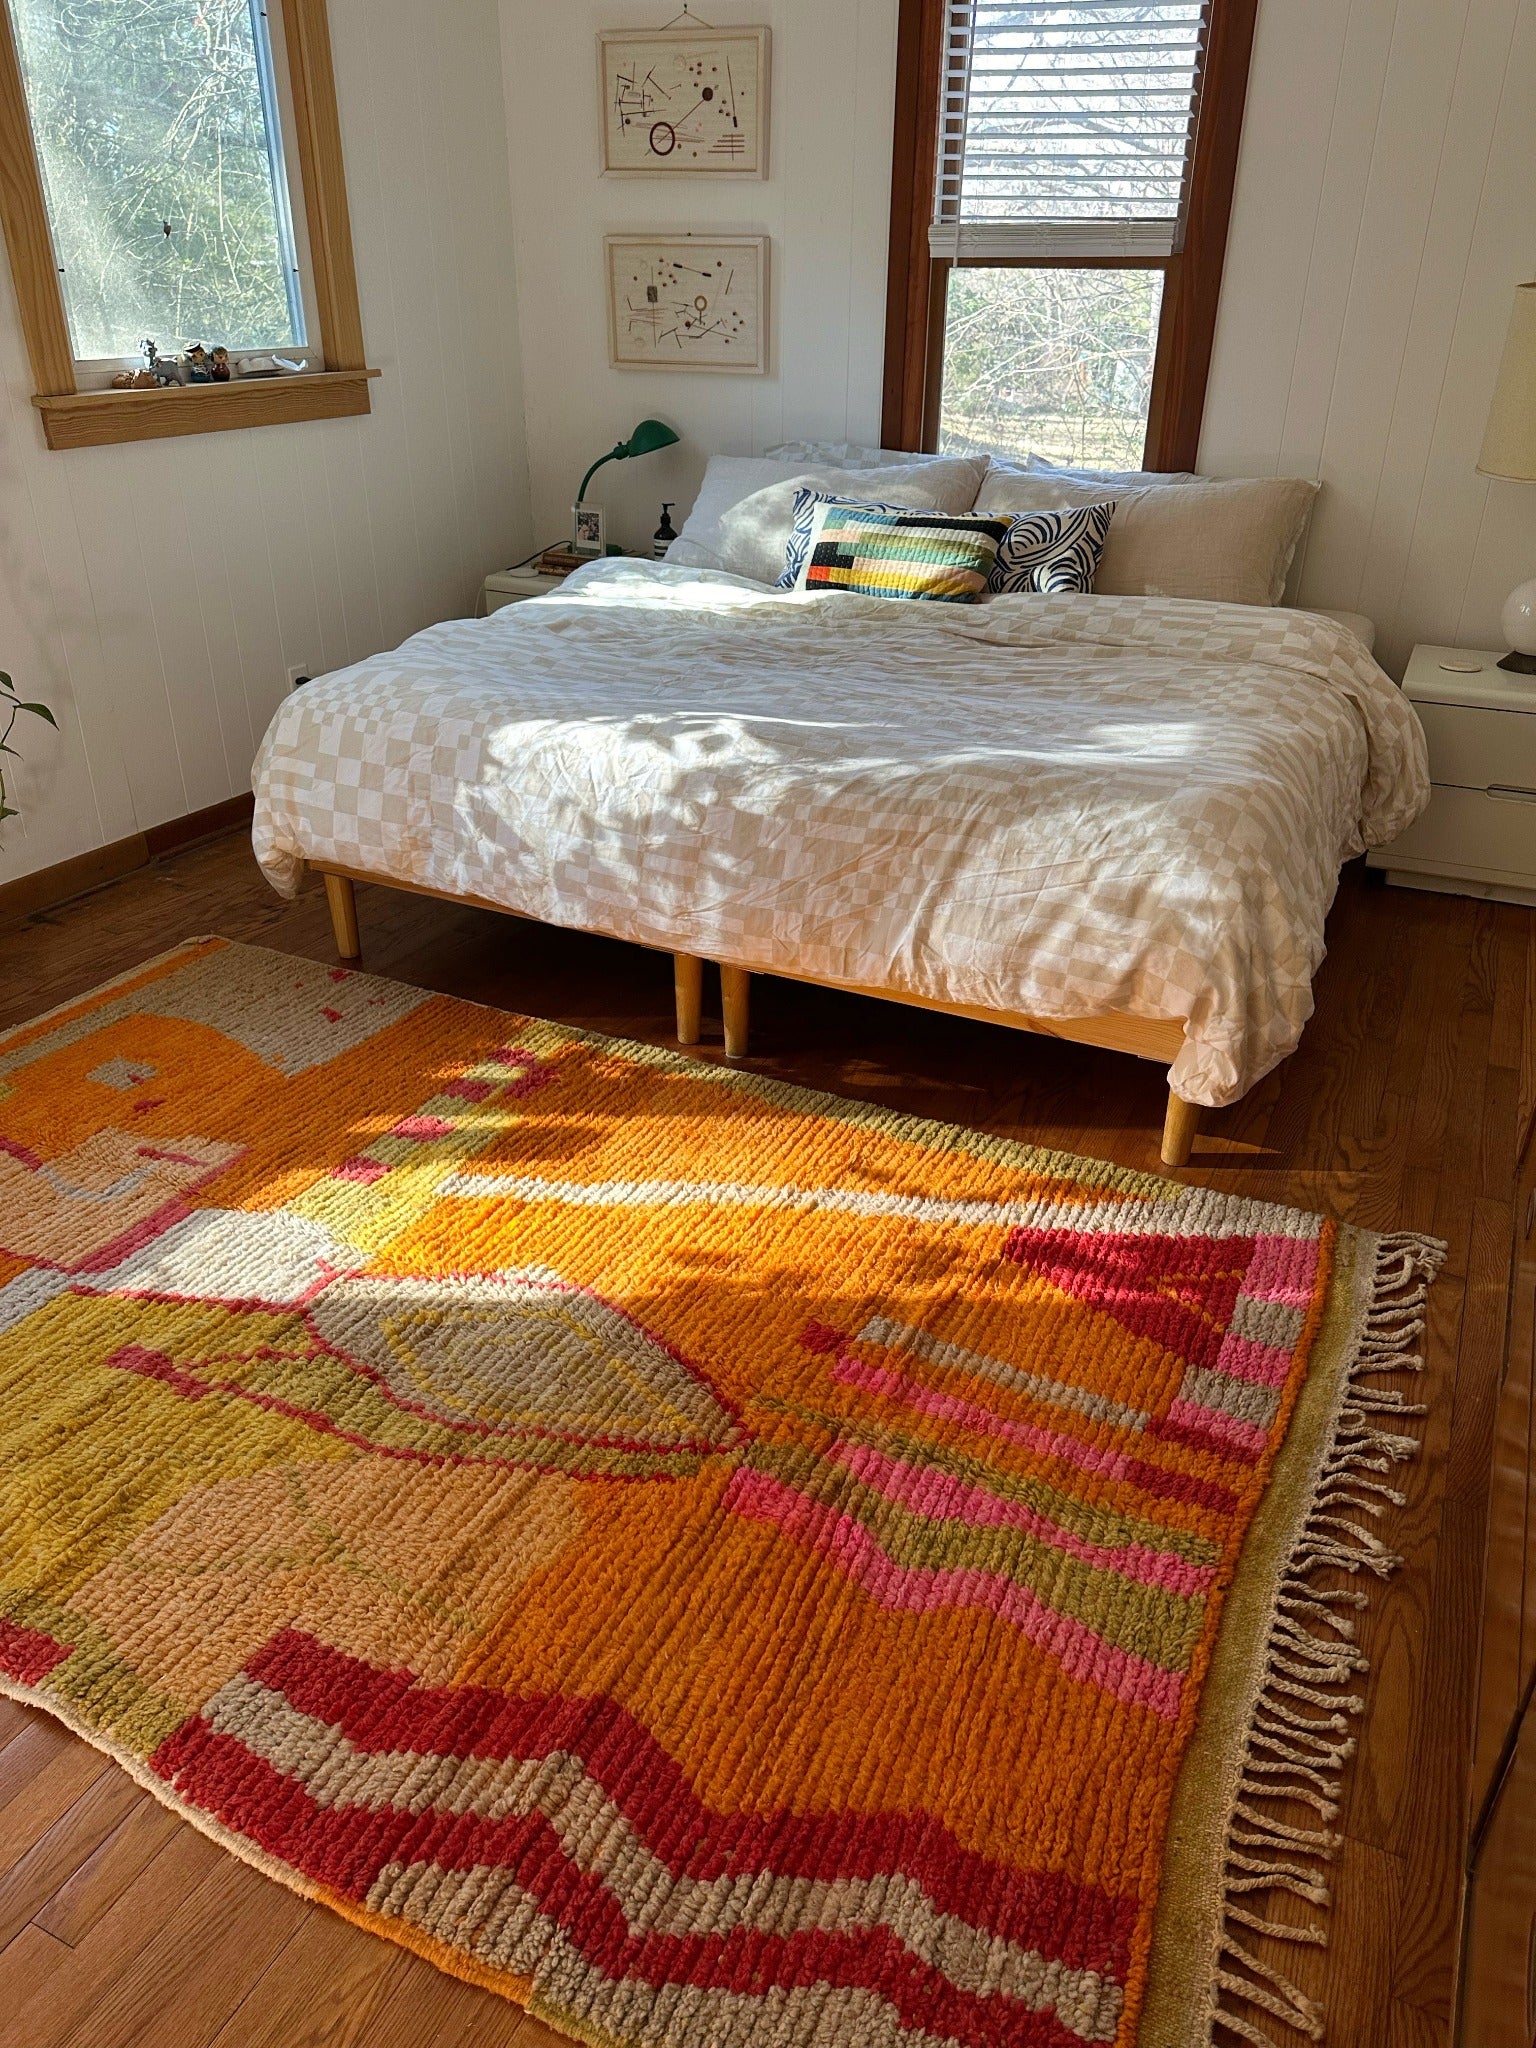 See Ojos multi-colored Moroccan Rug from an Angle